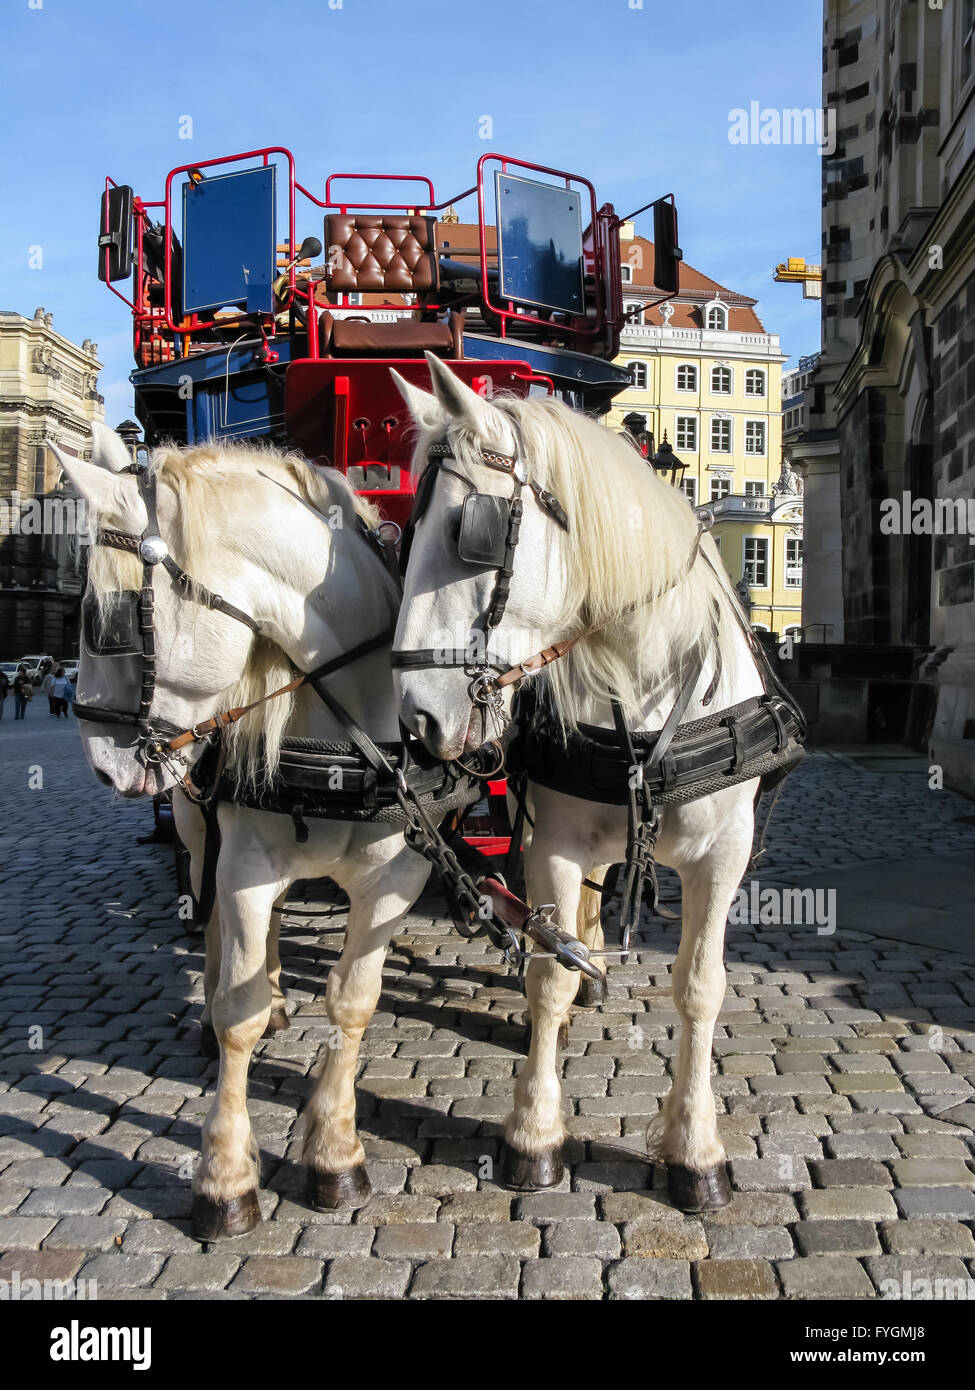 Two horses harnessed to the carriage Stock Photo